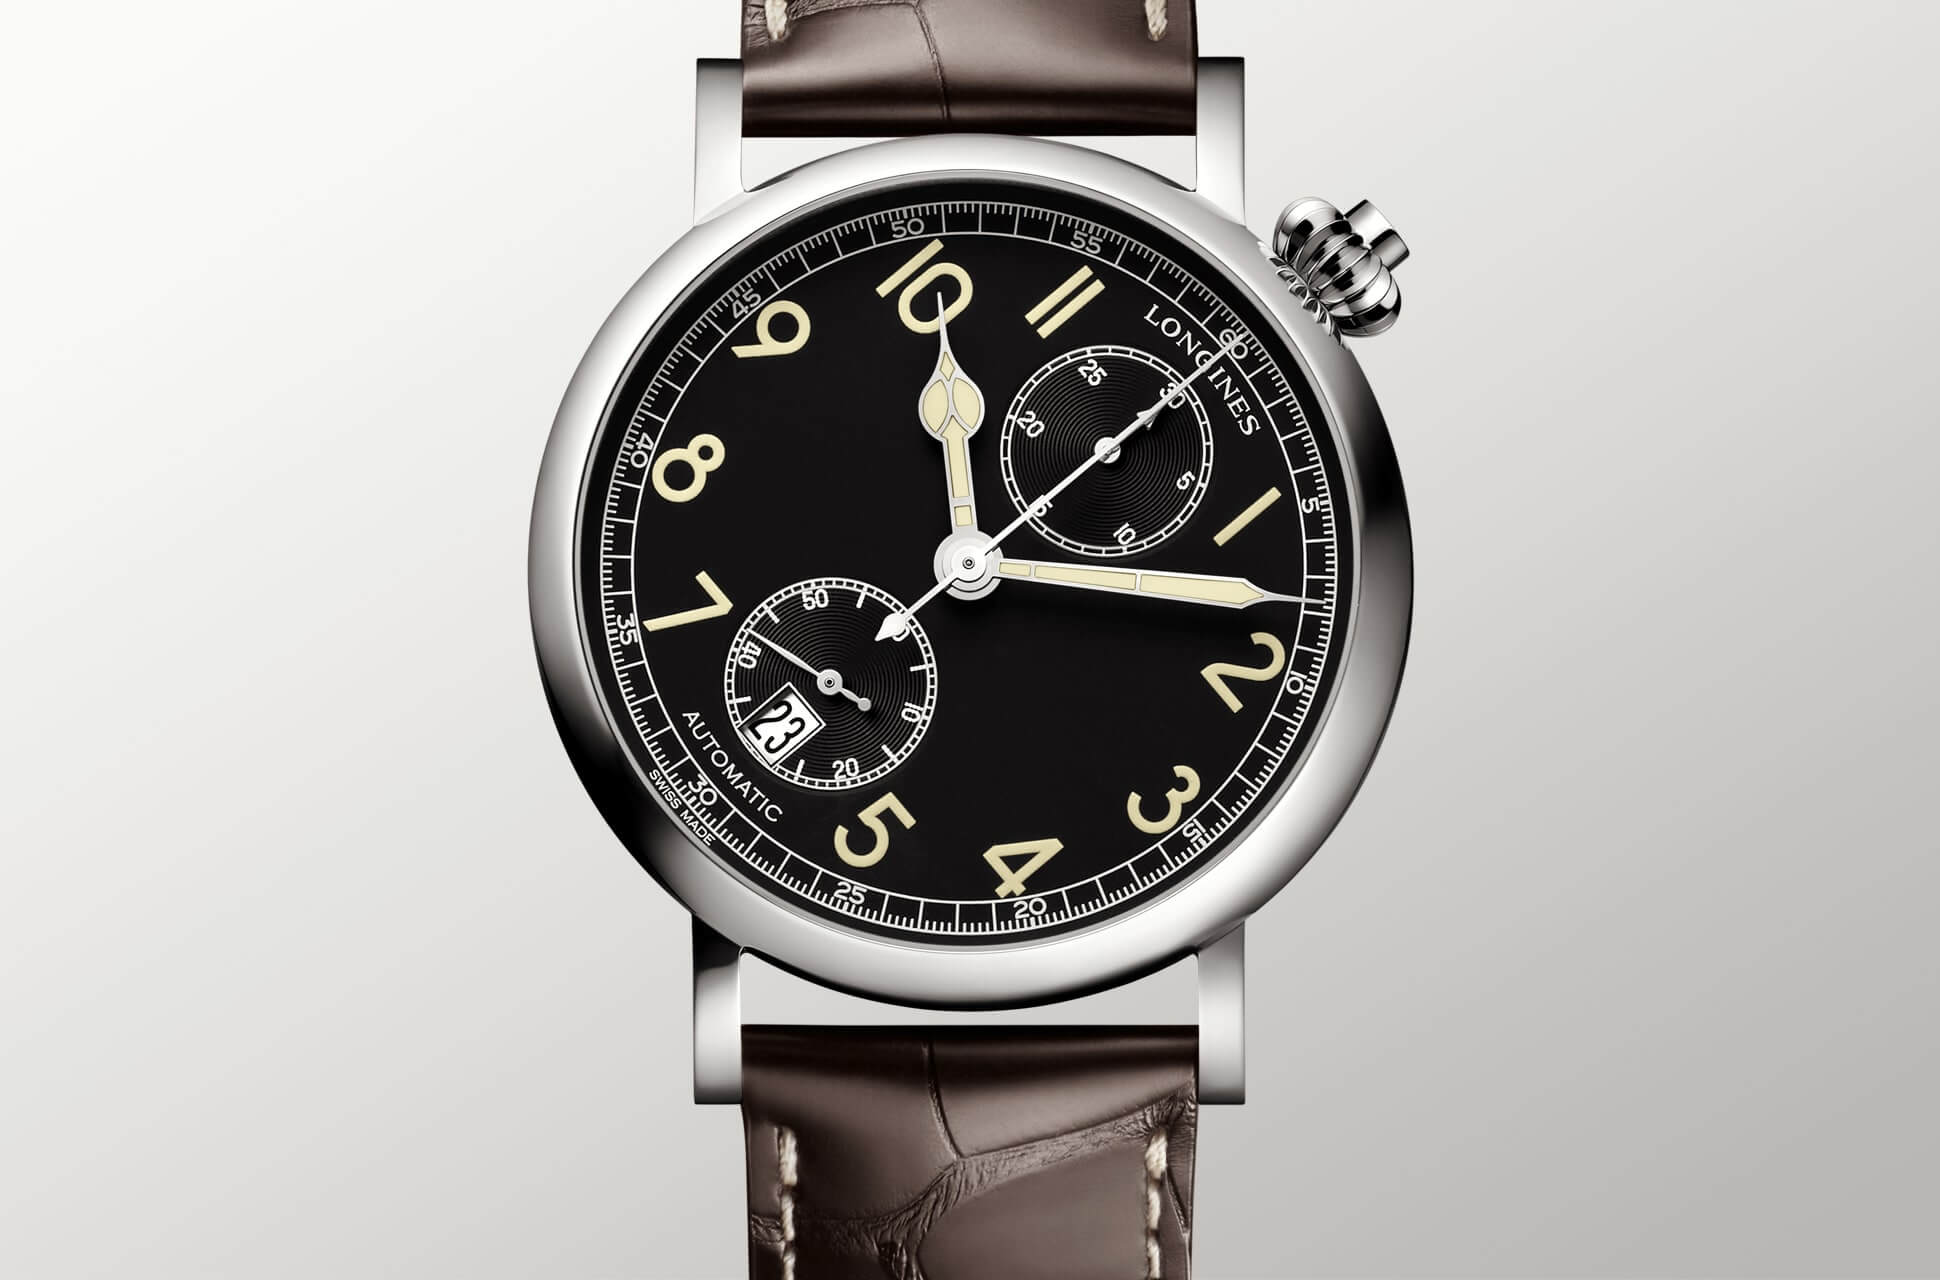 The Longines Avigation Watch Type A-7 1935